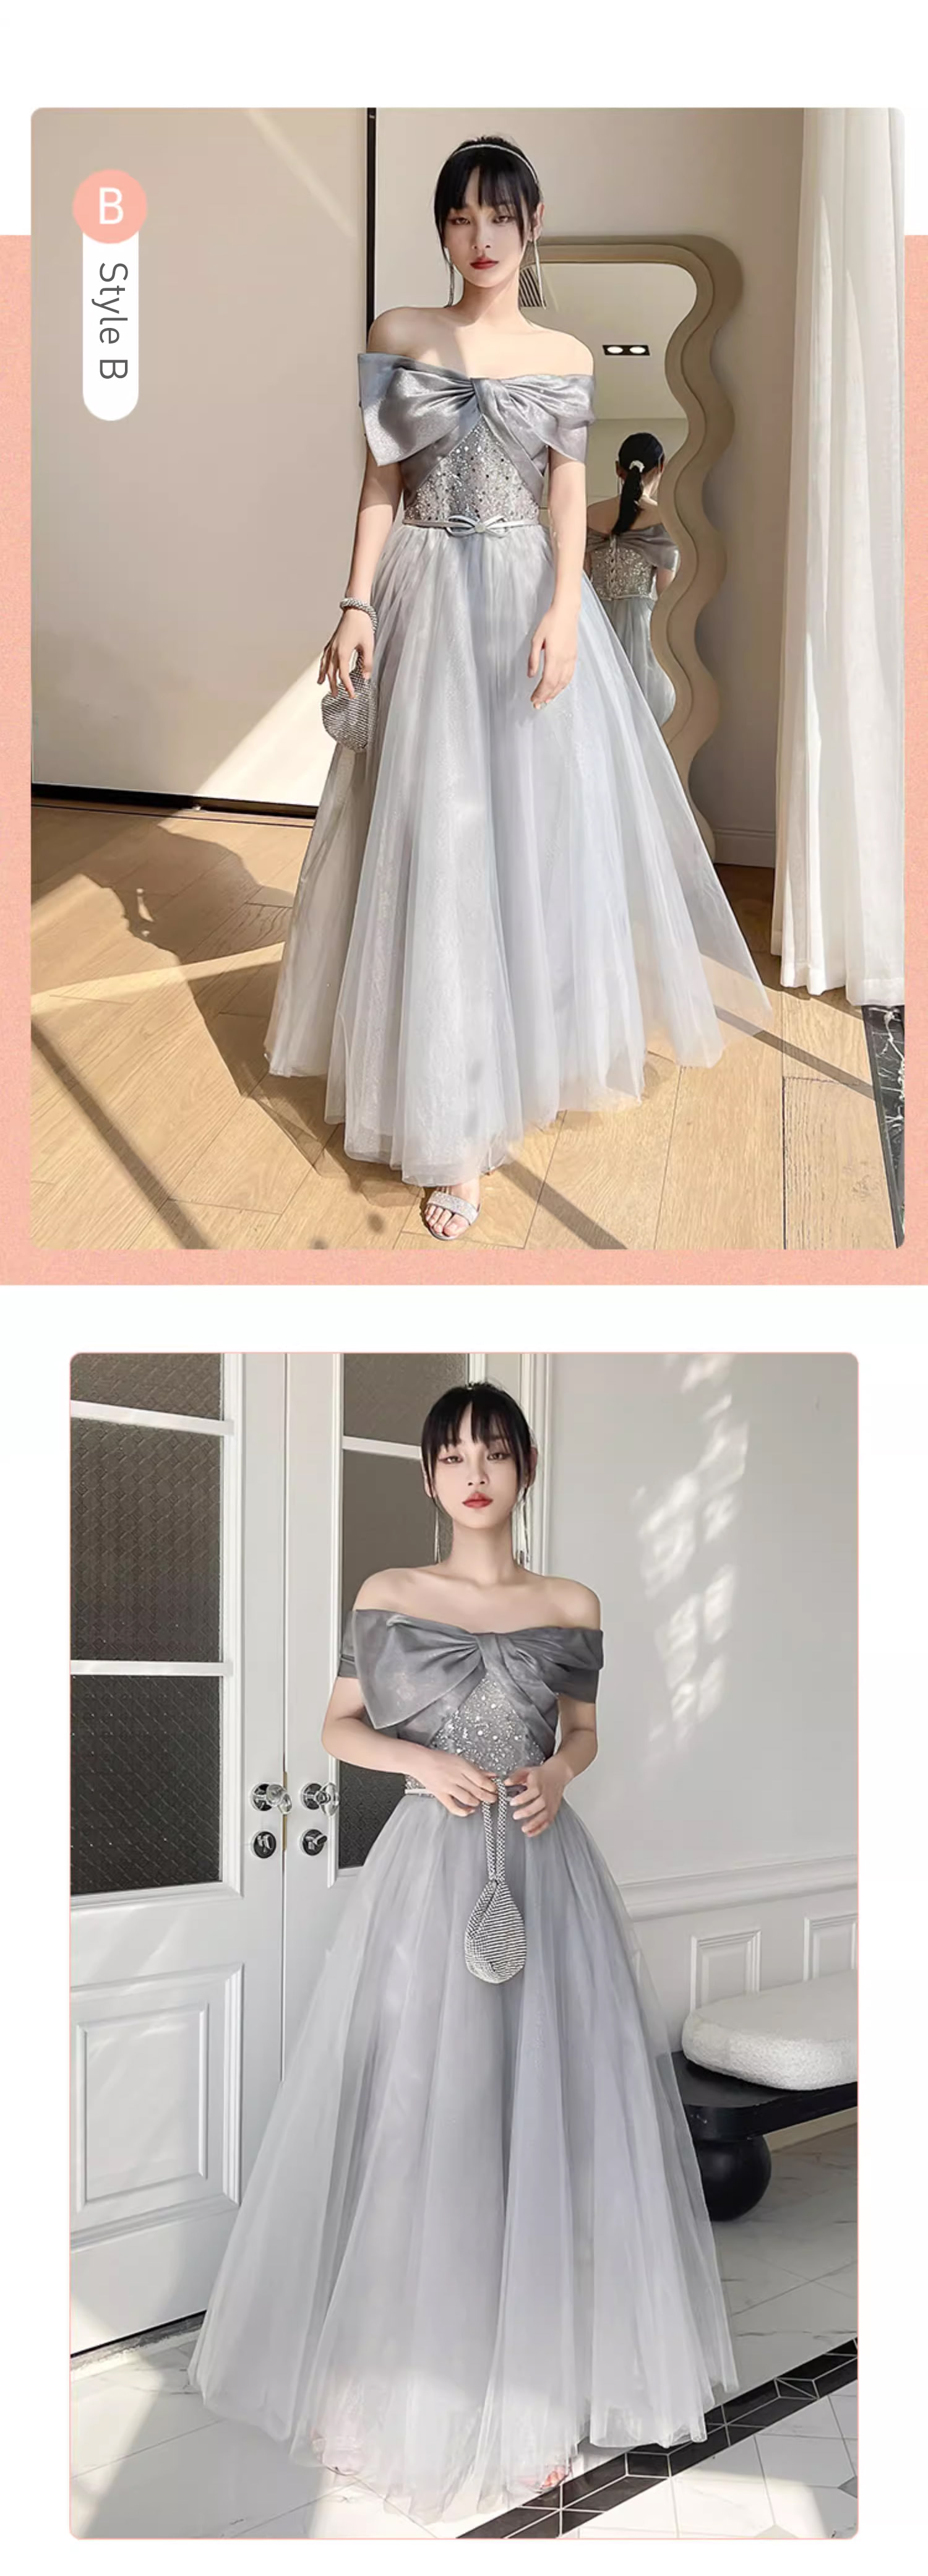 Fashion-A-line-Summer-Grey-Tulle-Evening-Prom-Bridesmaid-Maxi-Dress16